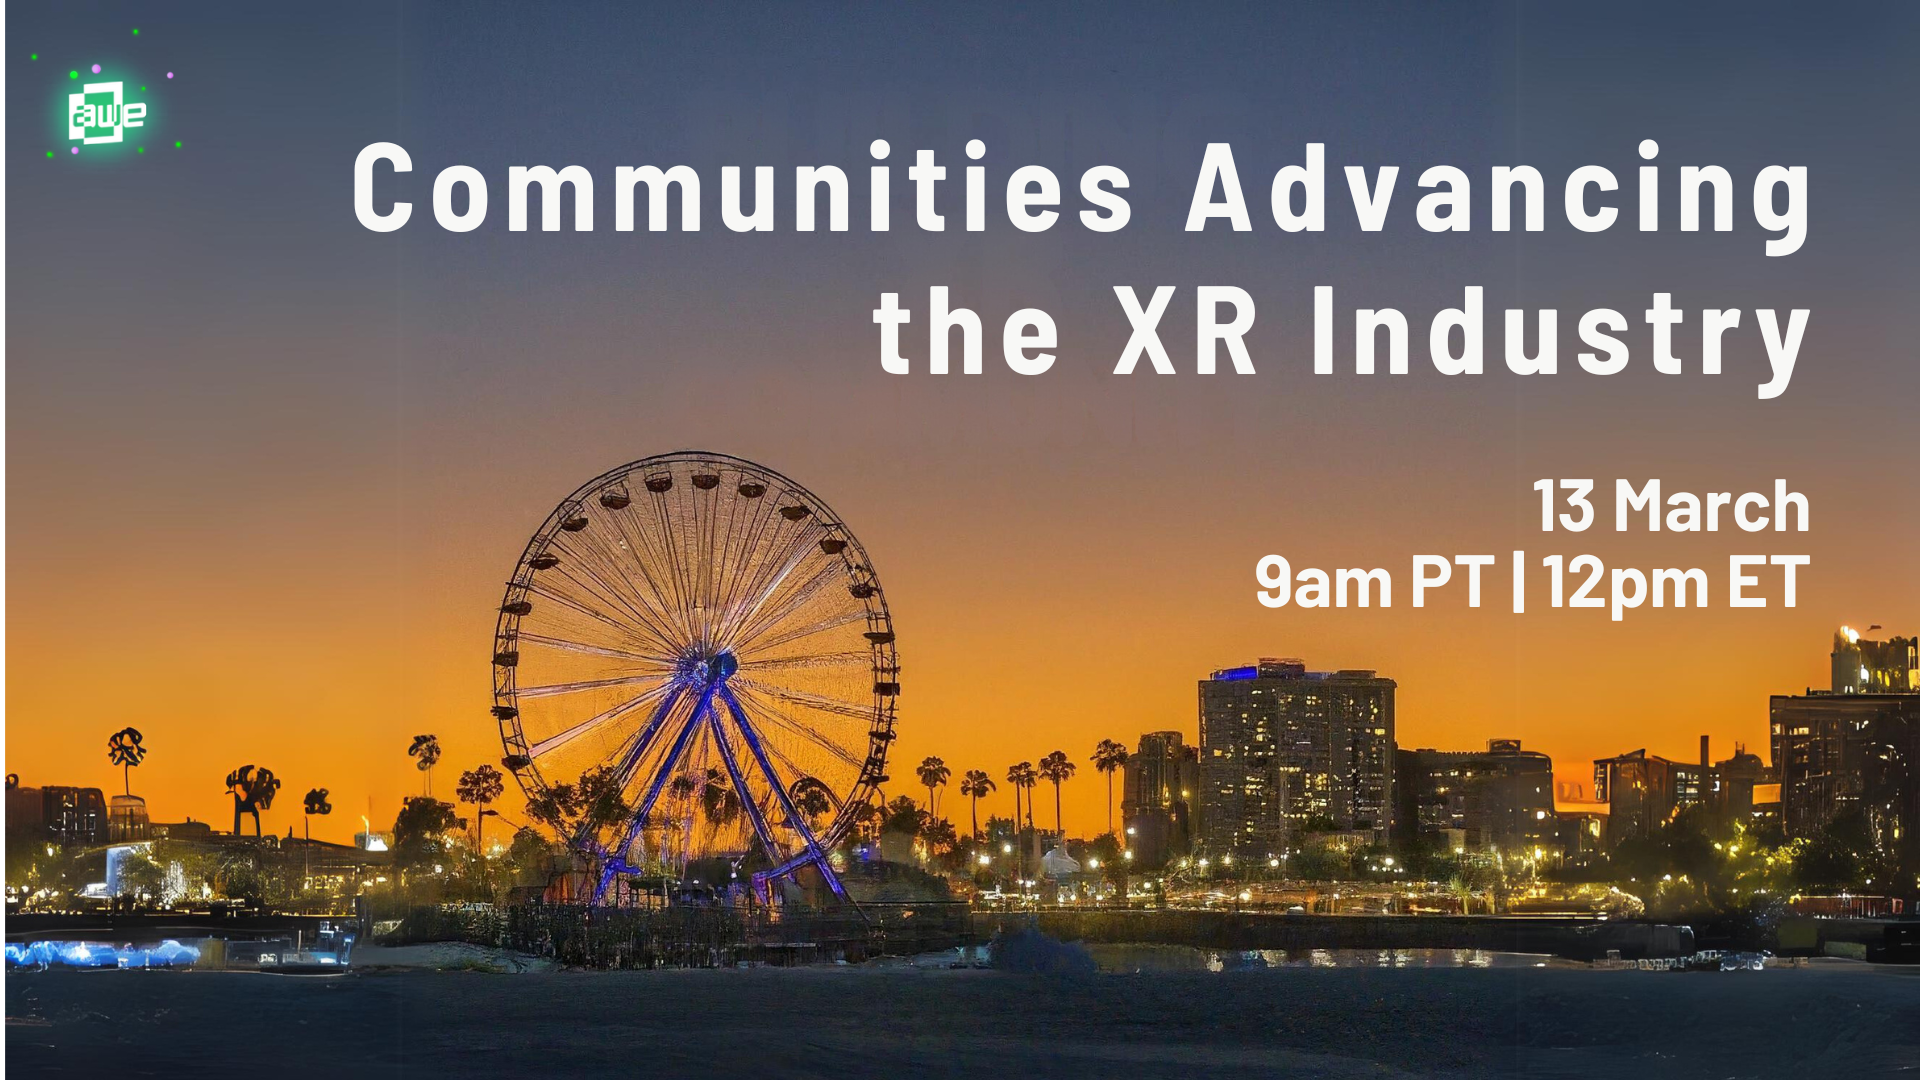 XRA CEO TO PARTICIPATE ON AWE LINKEDIN LIVE WEBINAR HIGHLIGHTING COMMUNITIES ADVANCING THE XR INDUSTRY